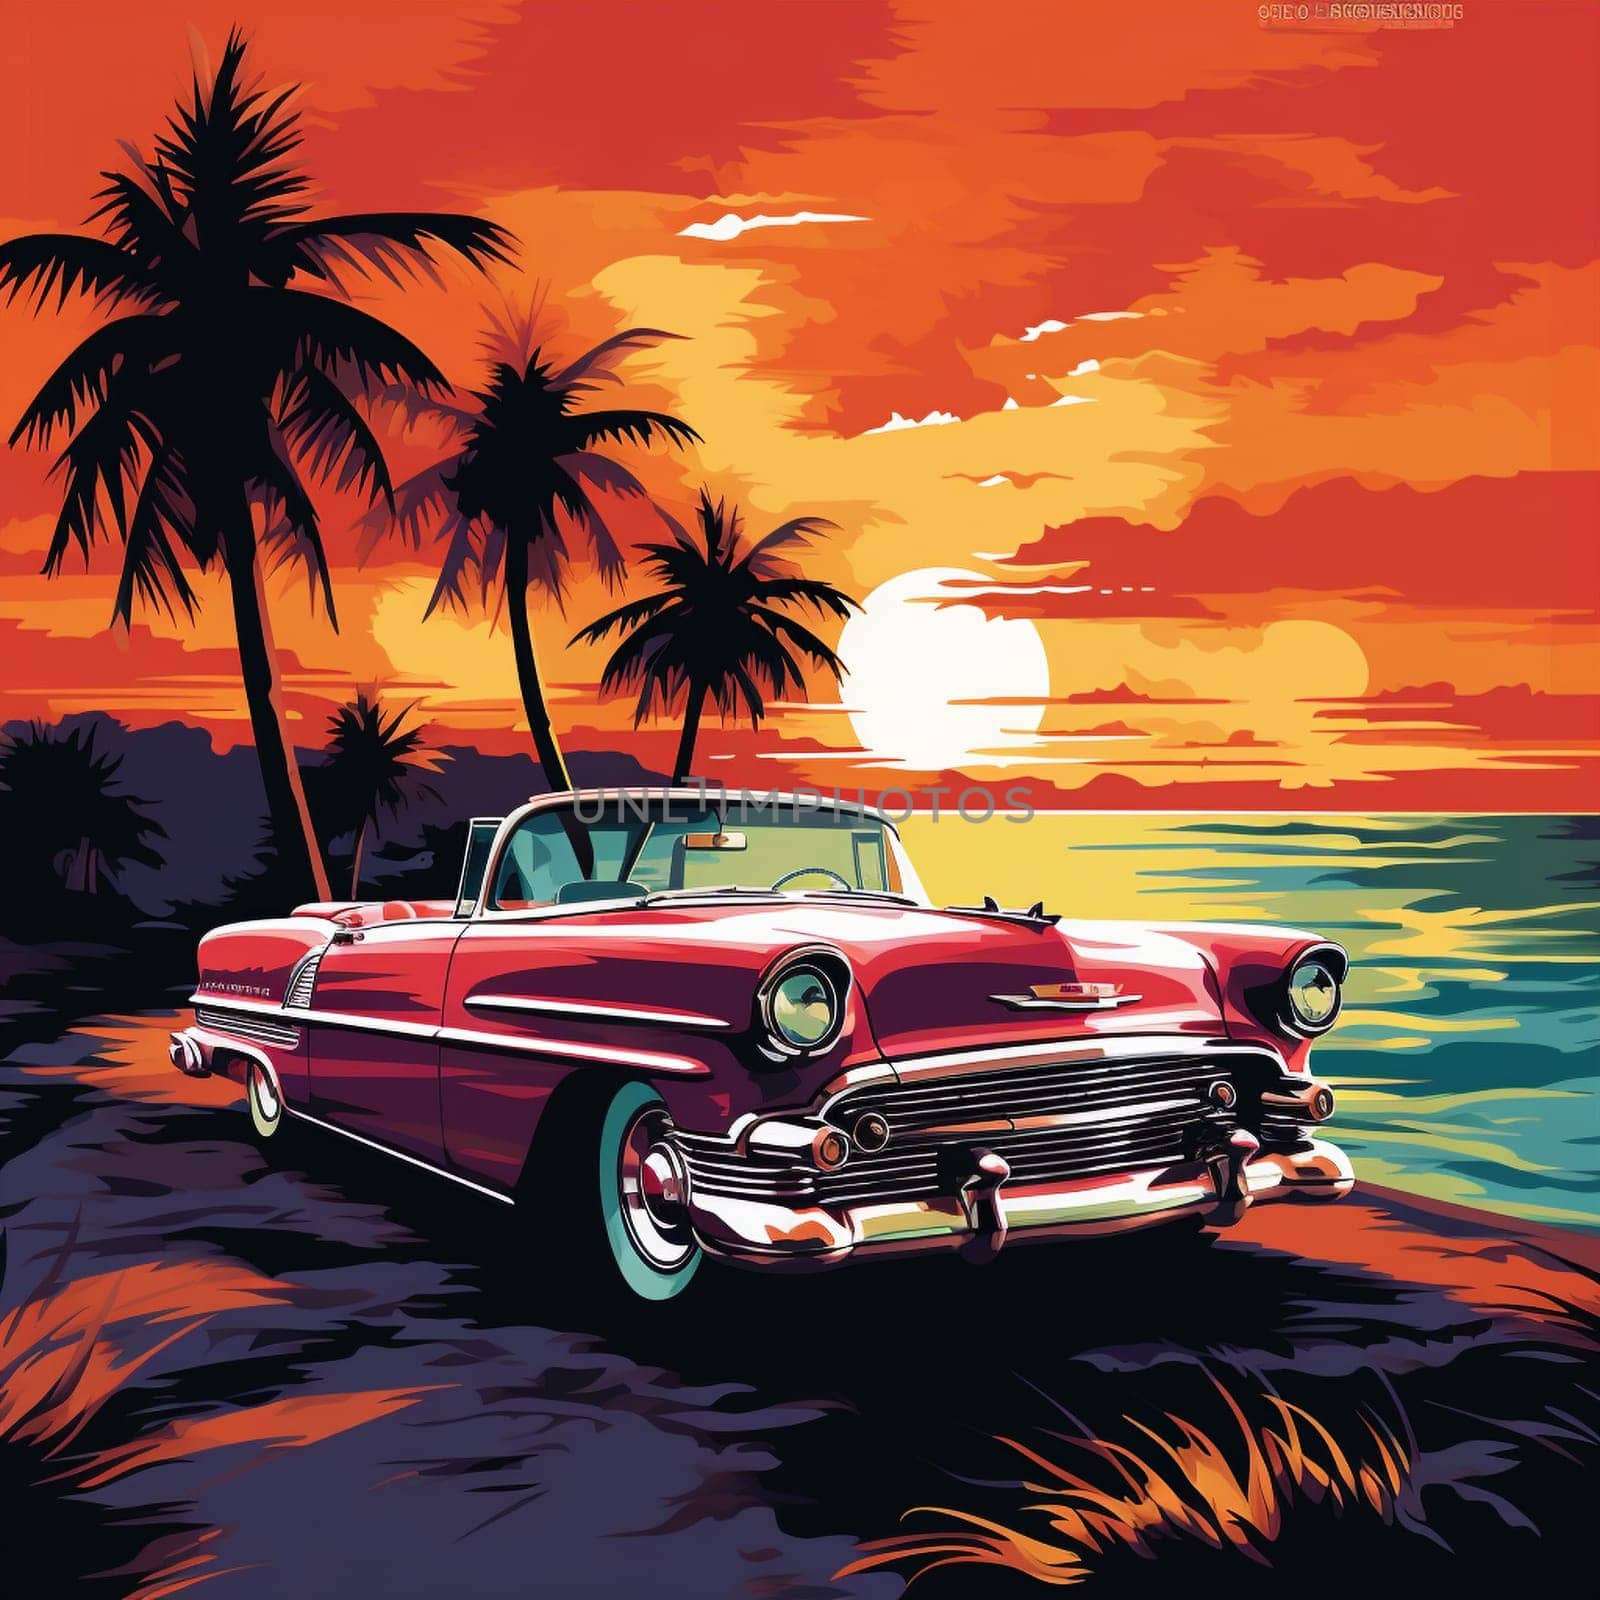 Experience the nostalgia of a bygone era with 'The Classic Cruiser: A Vintage Tale'! This art piece takes you back to the 1950s, featuring a classic convertible car cruising down an enchanting coastal road at sunset. The car exudes timeless elegance with its sleek curves, chrome details, and vibrant colors. The scene is filled with nostalgic charm - palm trees swaying in the gentle breeze, the ocean glistening in the background, and a picturesque lighthouse standing tall on a rocky cliff. The warm, golden hues of the lighting cast long shadows on the road, evoking a sense of tranquility and wanderlust. Immerse yourself in the joy of freedom and embark on a journey to a simpler time.